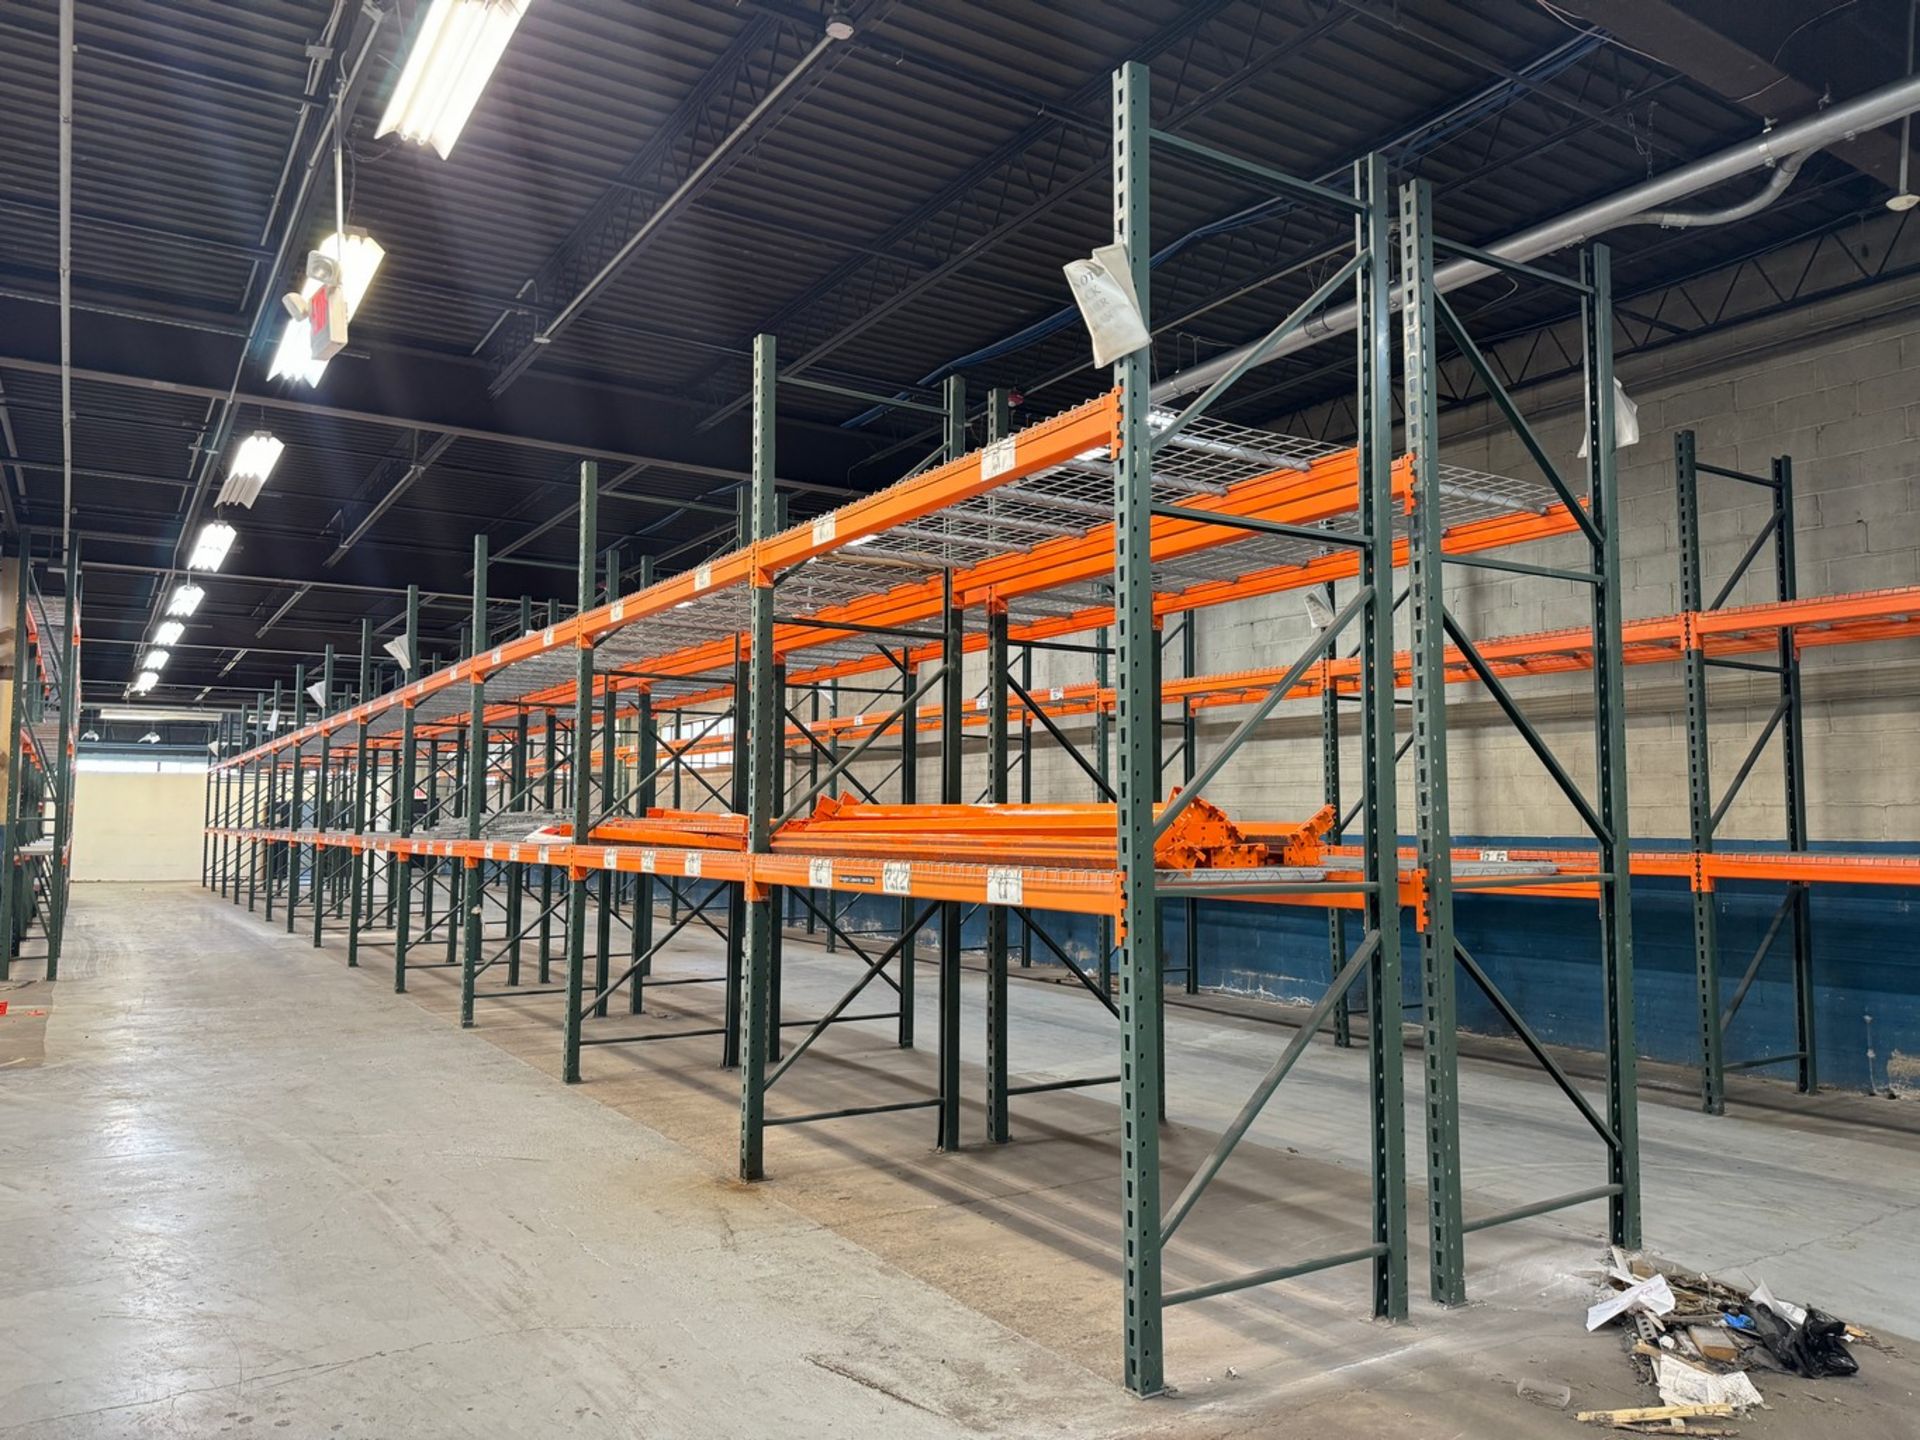 26-Sections Heavy Duty Pallet Racking, 96"W x 44"D x 144"H, 3000 LB Weight Capacity - Image 2 of 3